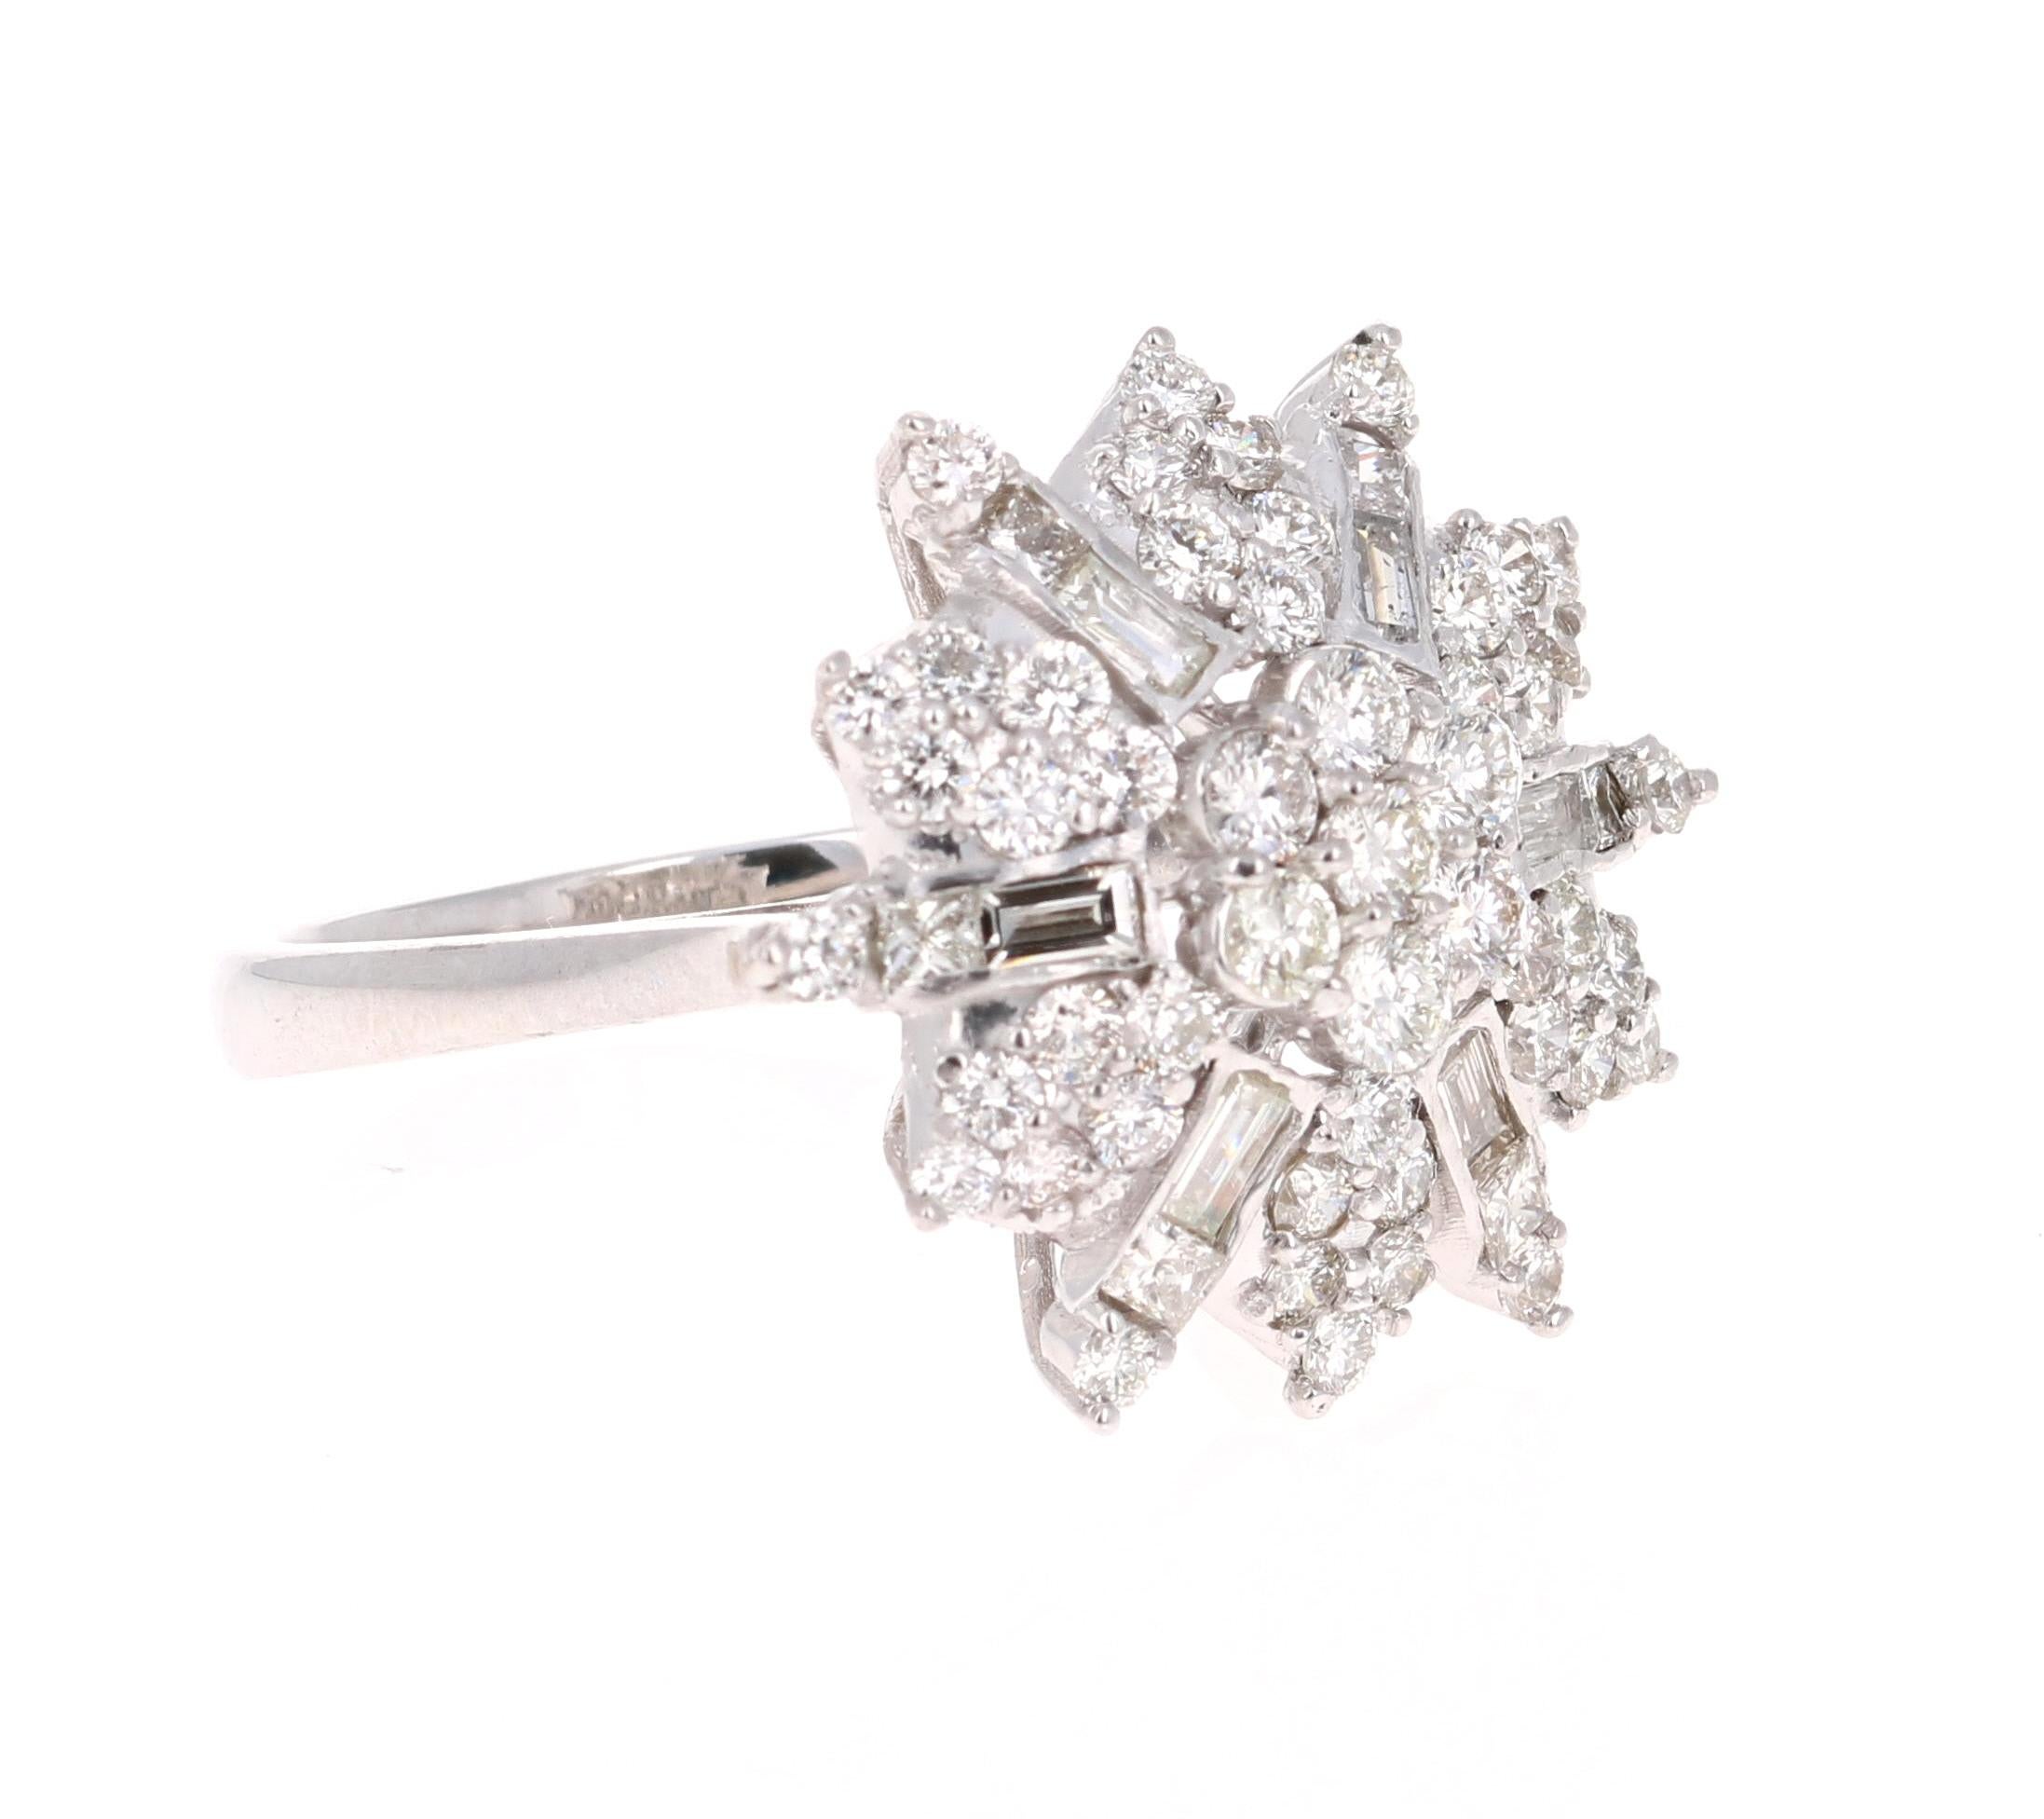 A simple cocktail/statement ring with both Baguette and Round Cut Diamonds. Very much on trend with the modern day rings. A ring that screams #girlpower #bossbabe #bosslady for the independent and strong! 
Great as an everyday wear and to wear with